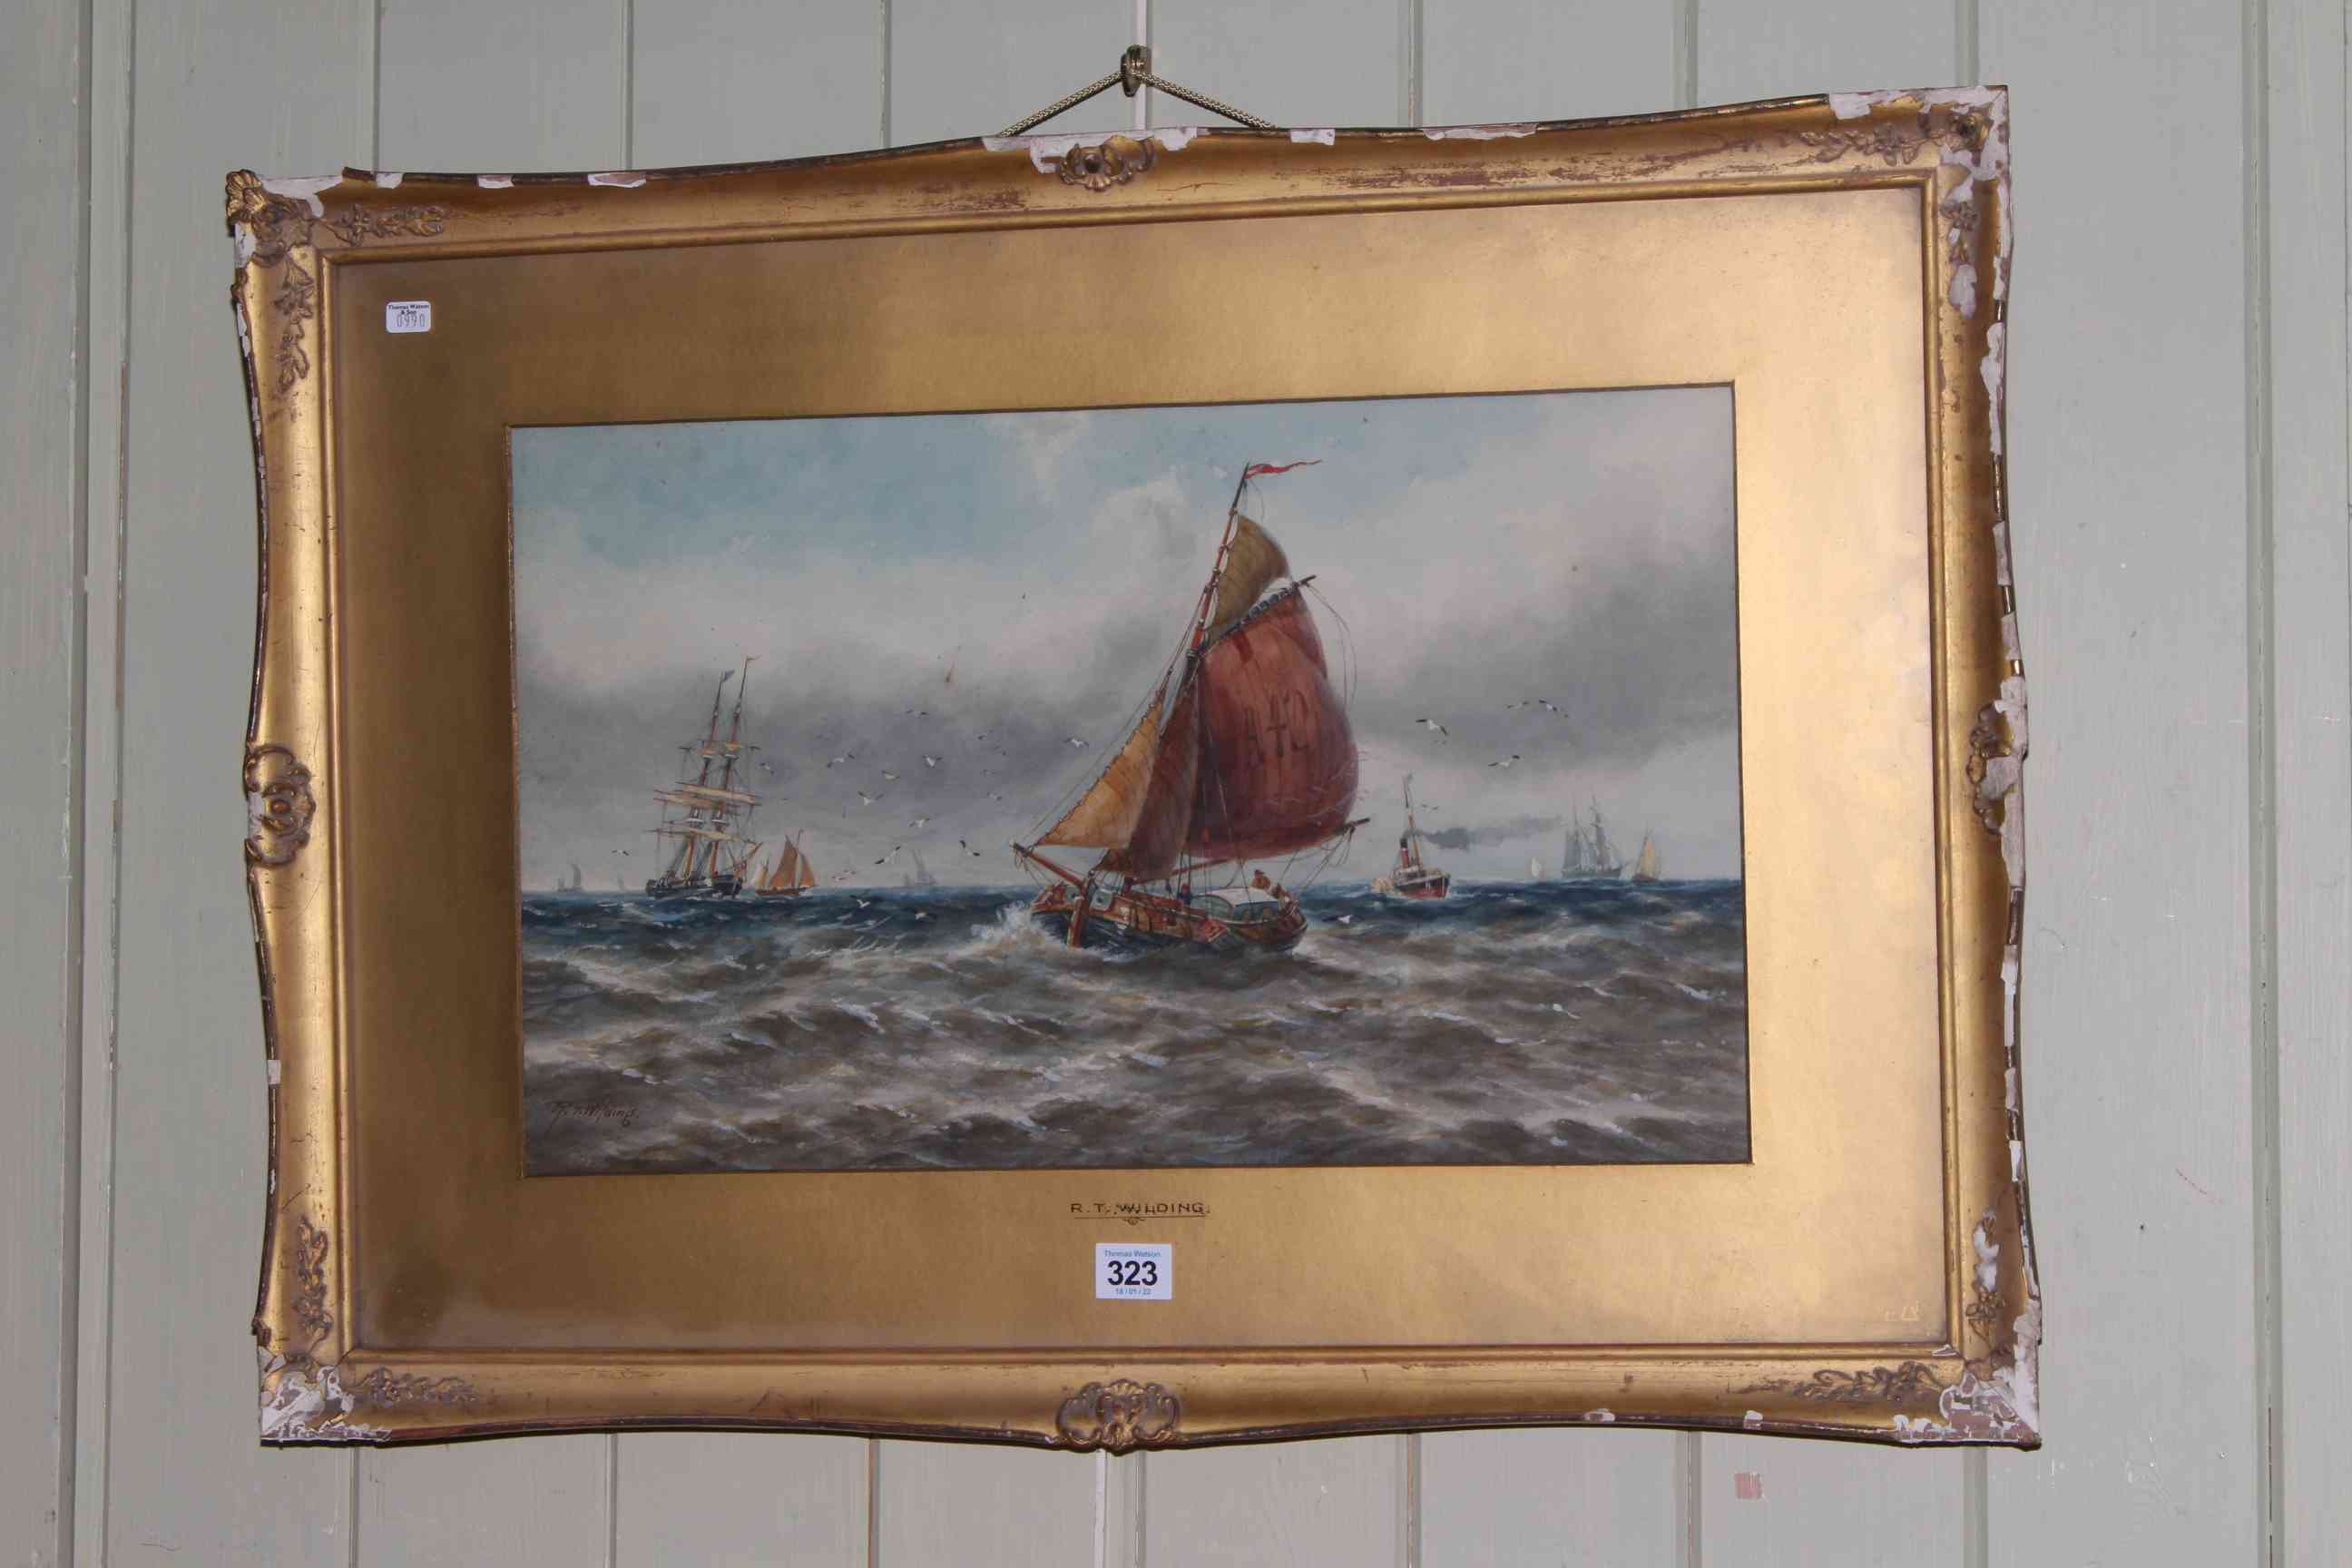 R T Wilding, Vessels at Sea, watercolour, signed lower left, 29.5 x 49.5cm, in gilt glazed frame.